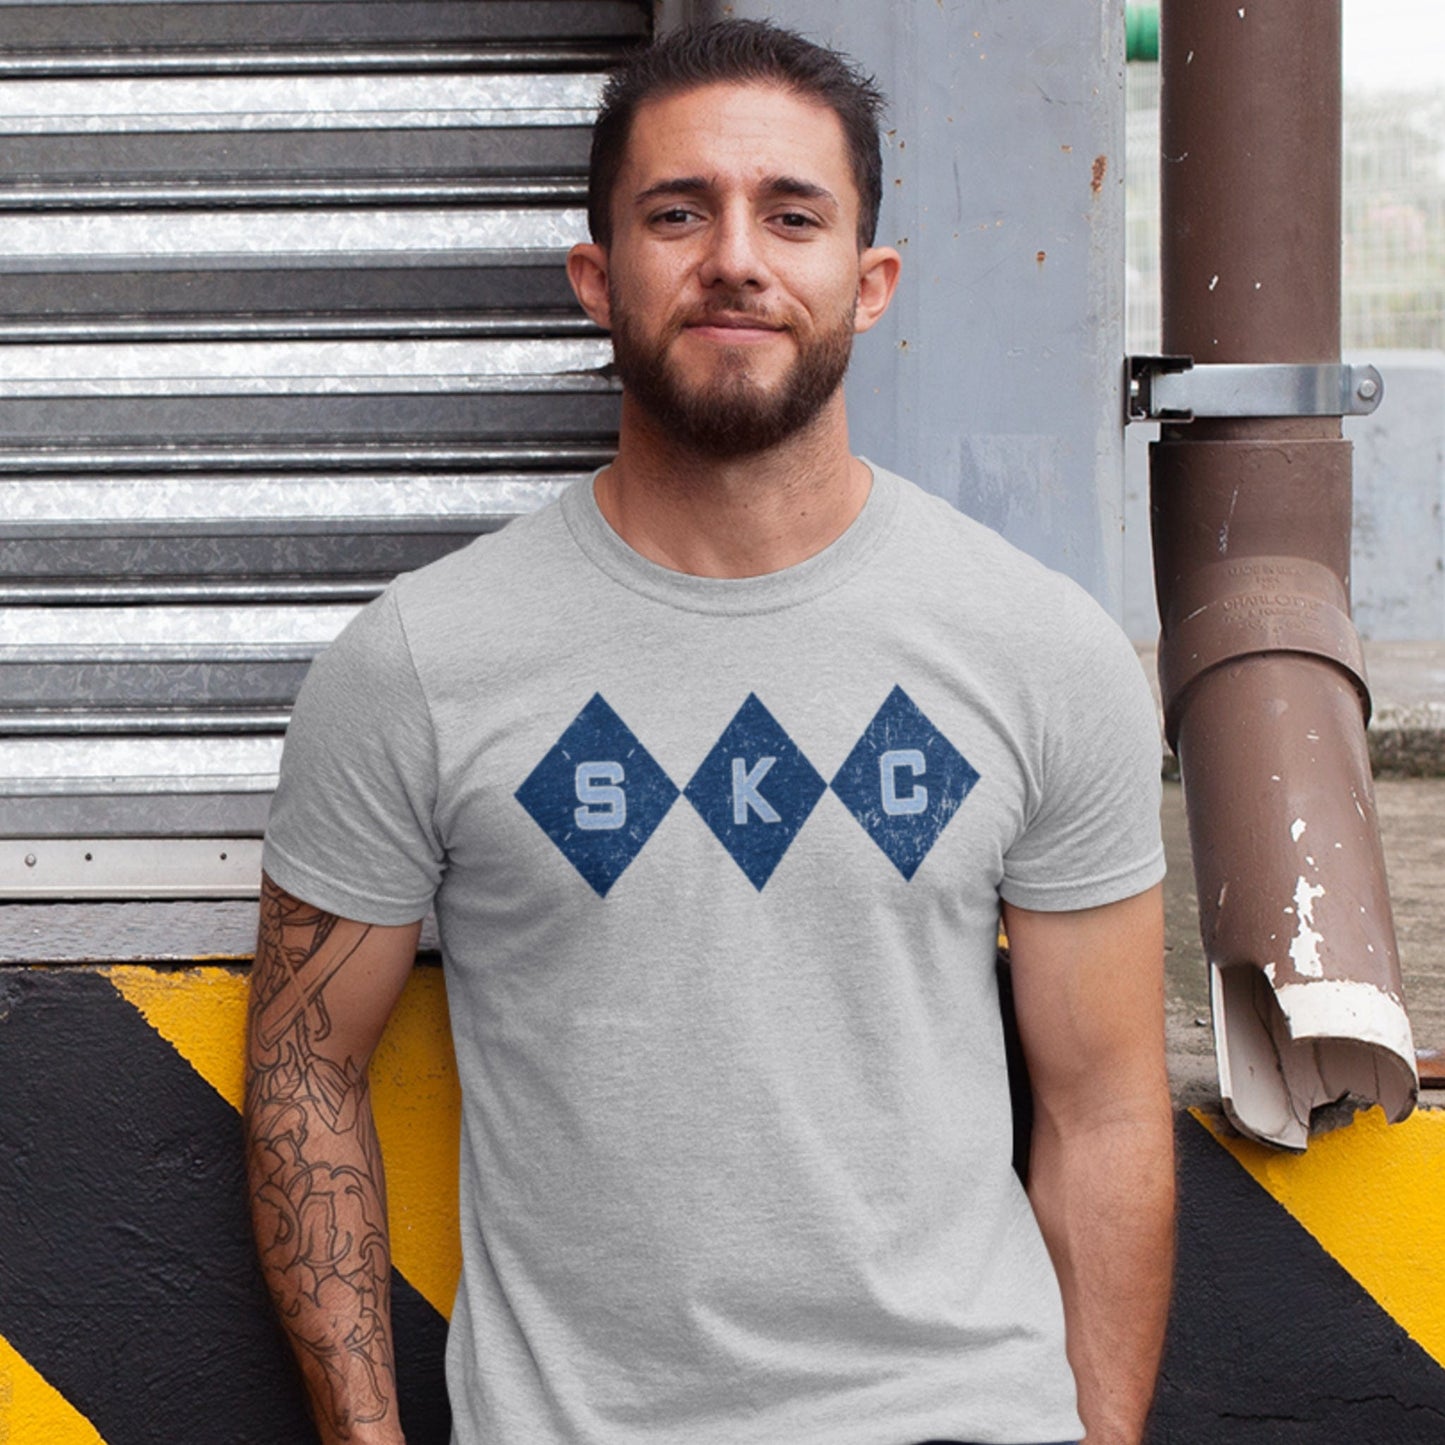 KC Swag Sporting Kansas City powder blue/navy SKC DIAMONDS with argyle stitching on athletic heather grey t-shirt worn by male model leaning against urban loading dock